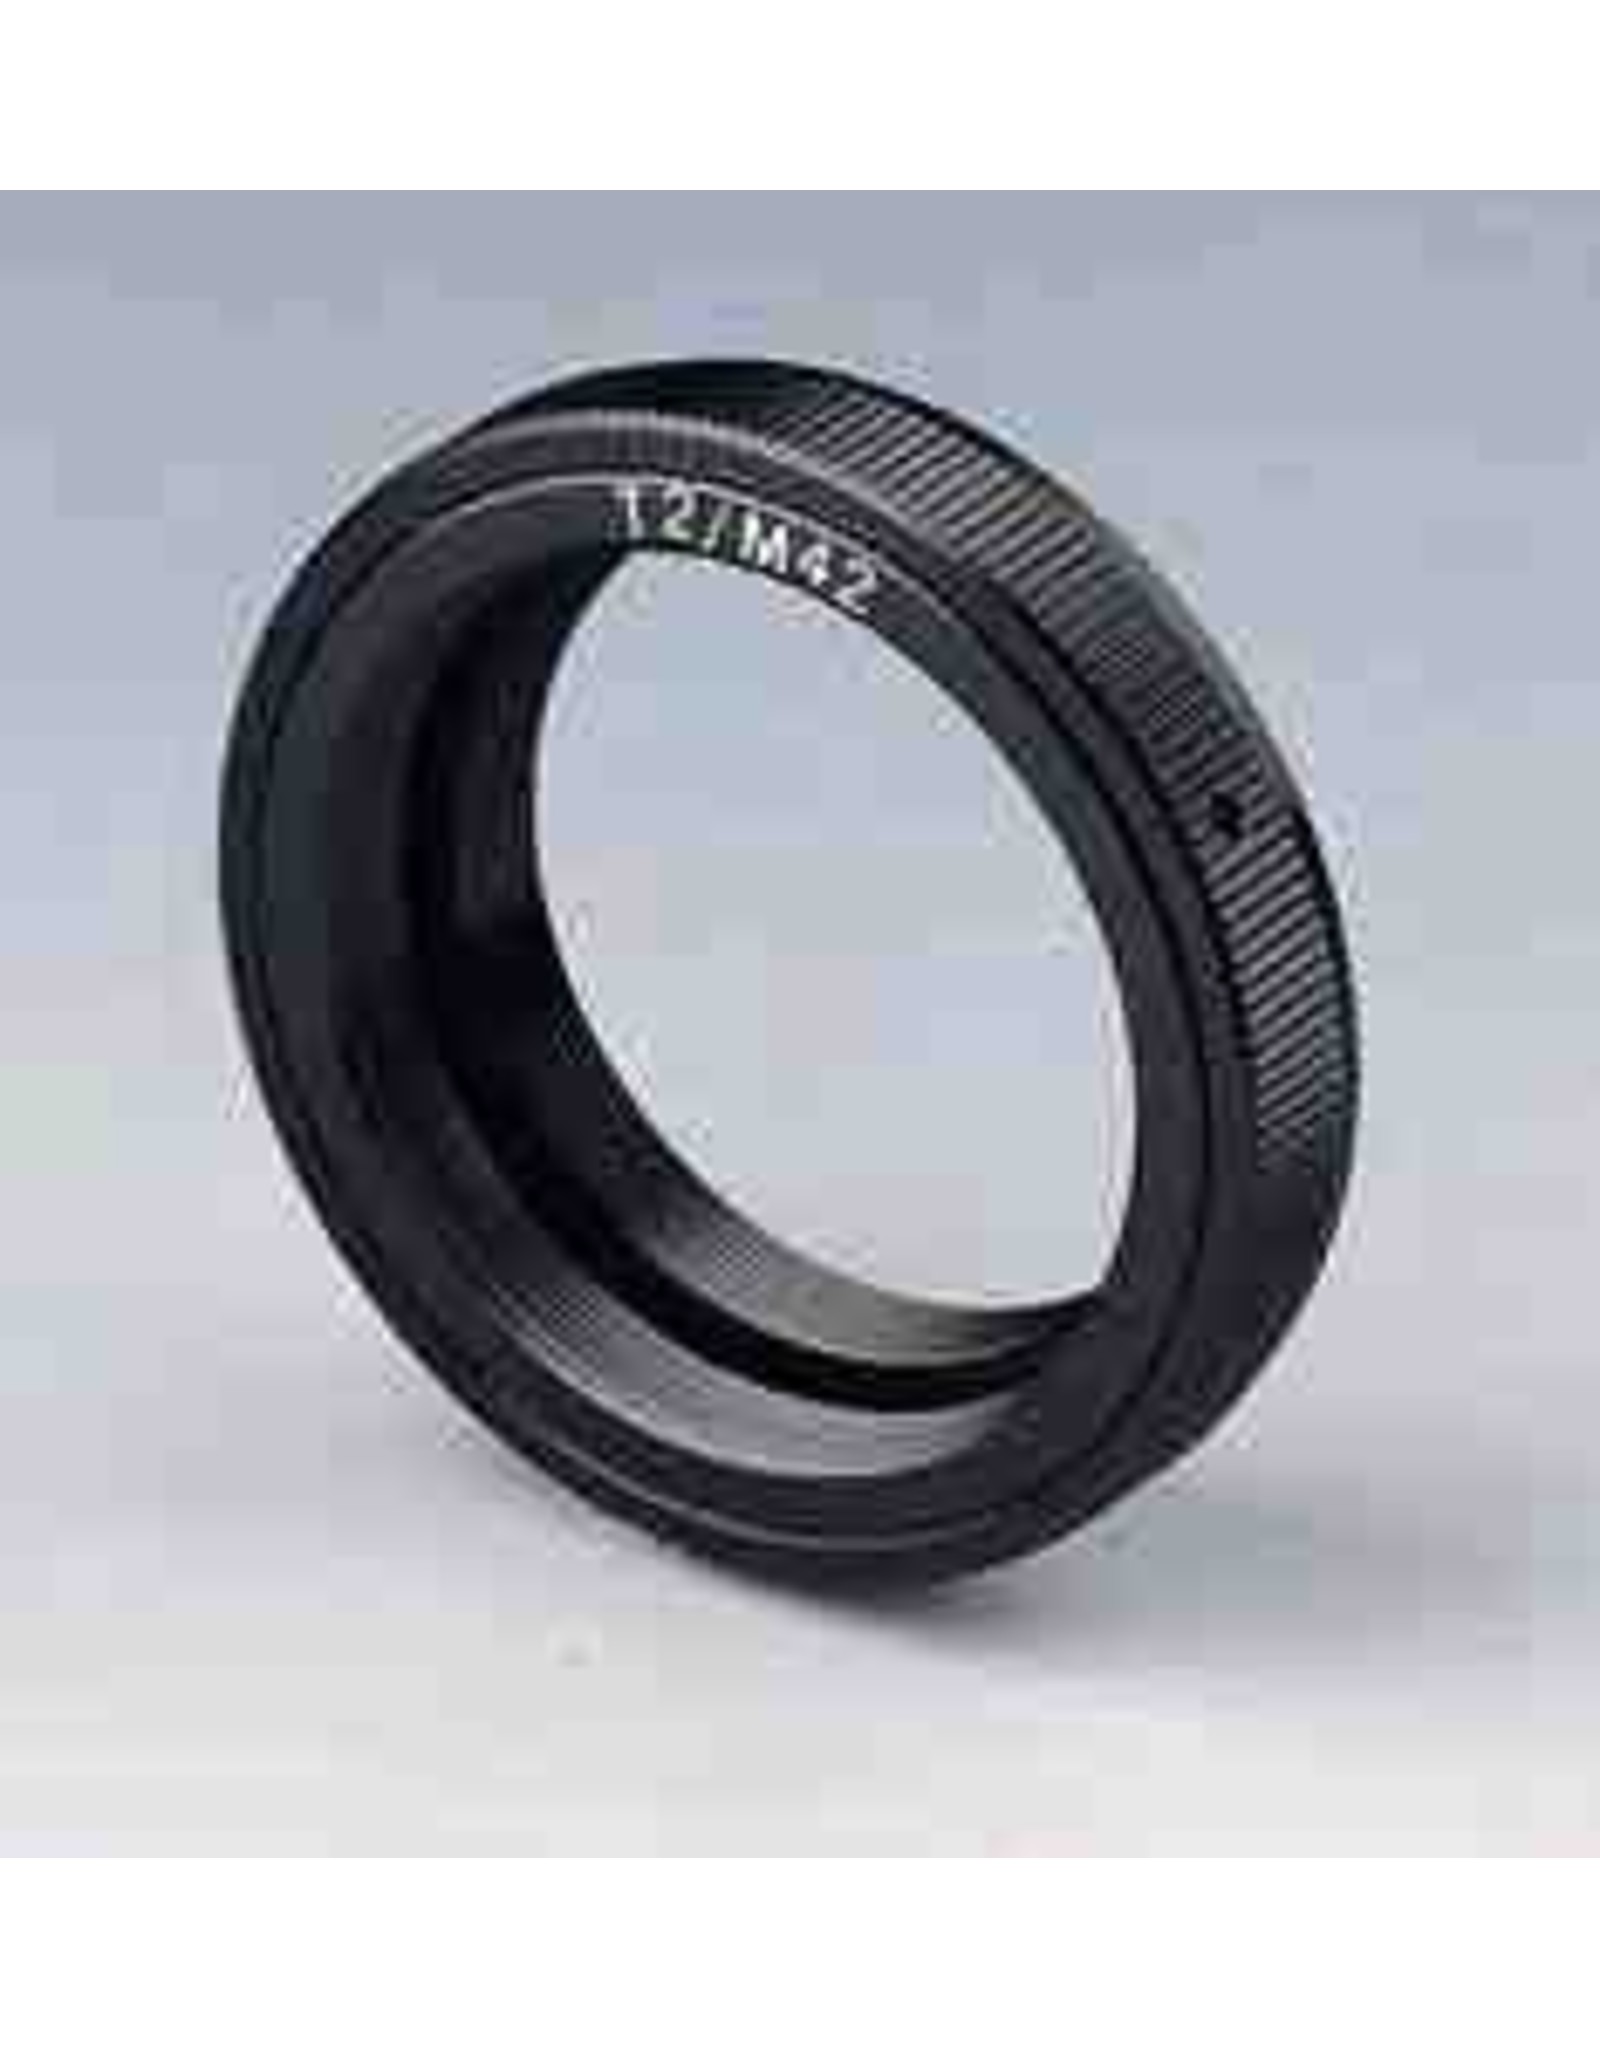 T Mount Adapter Ring Canon EOS